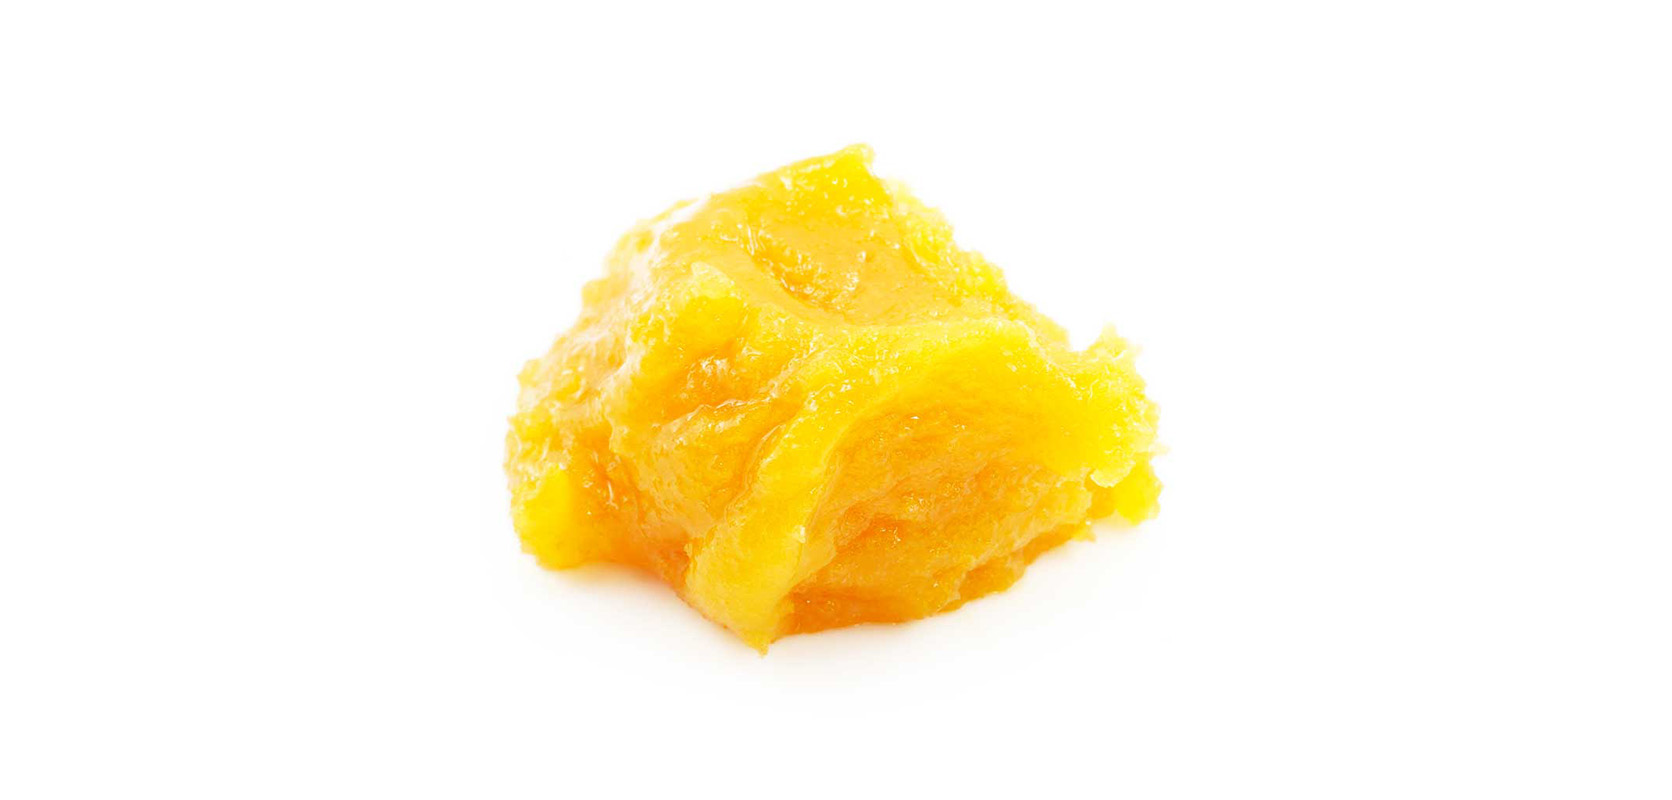 Buy Live Resin Agent Orange Sativa strain THC concentrate dab drug at wccannabis. cheapweed dispensary for value buds and mail order marijuana Canada.